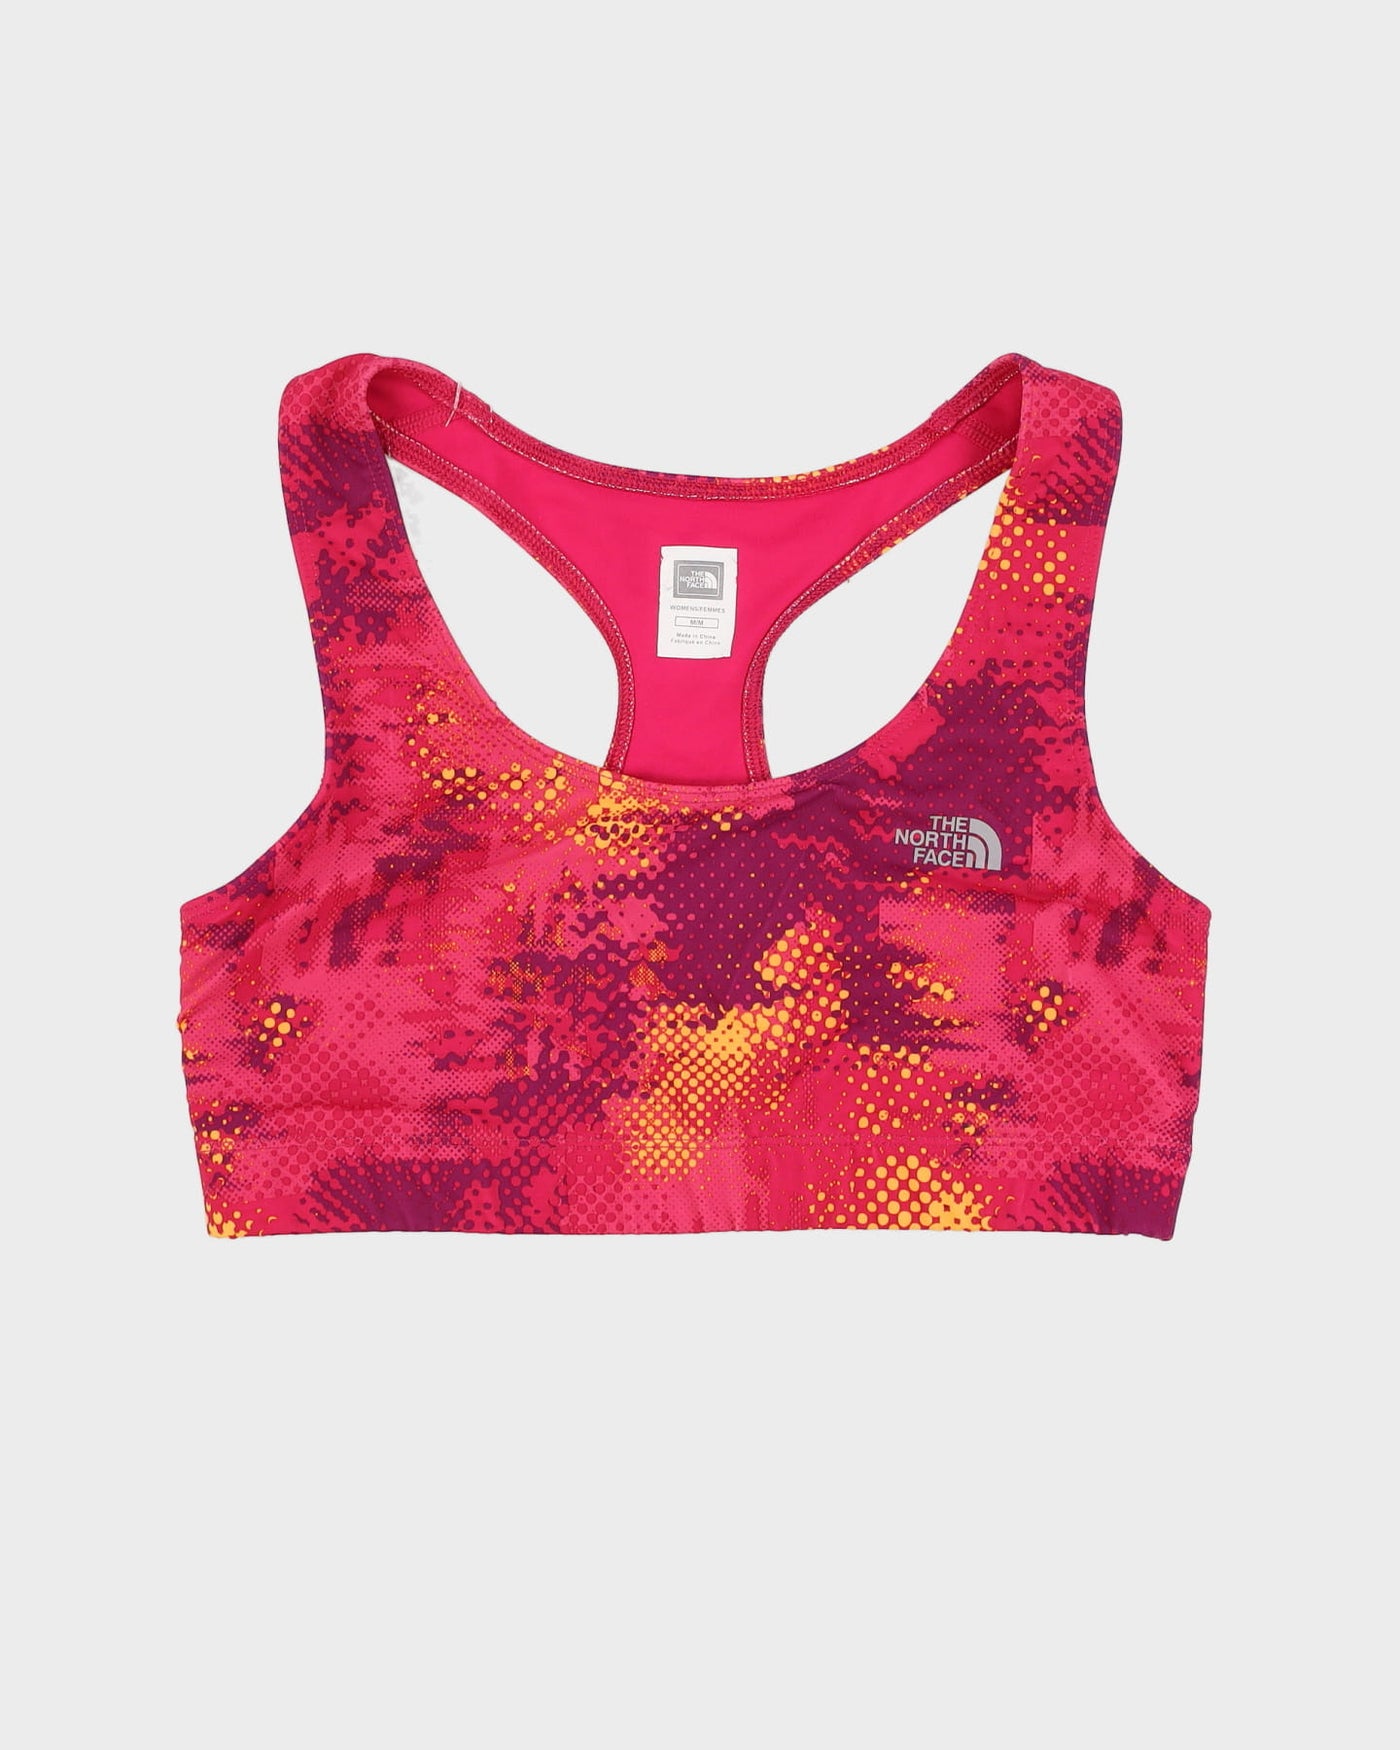 The North Face Pink Patterned Sports Bikini Top - S / M – Rokit